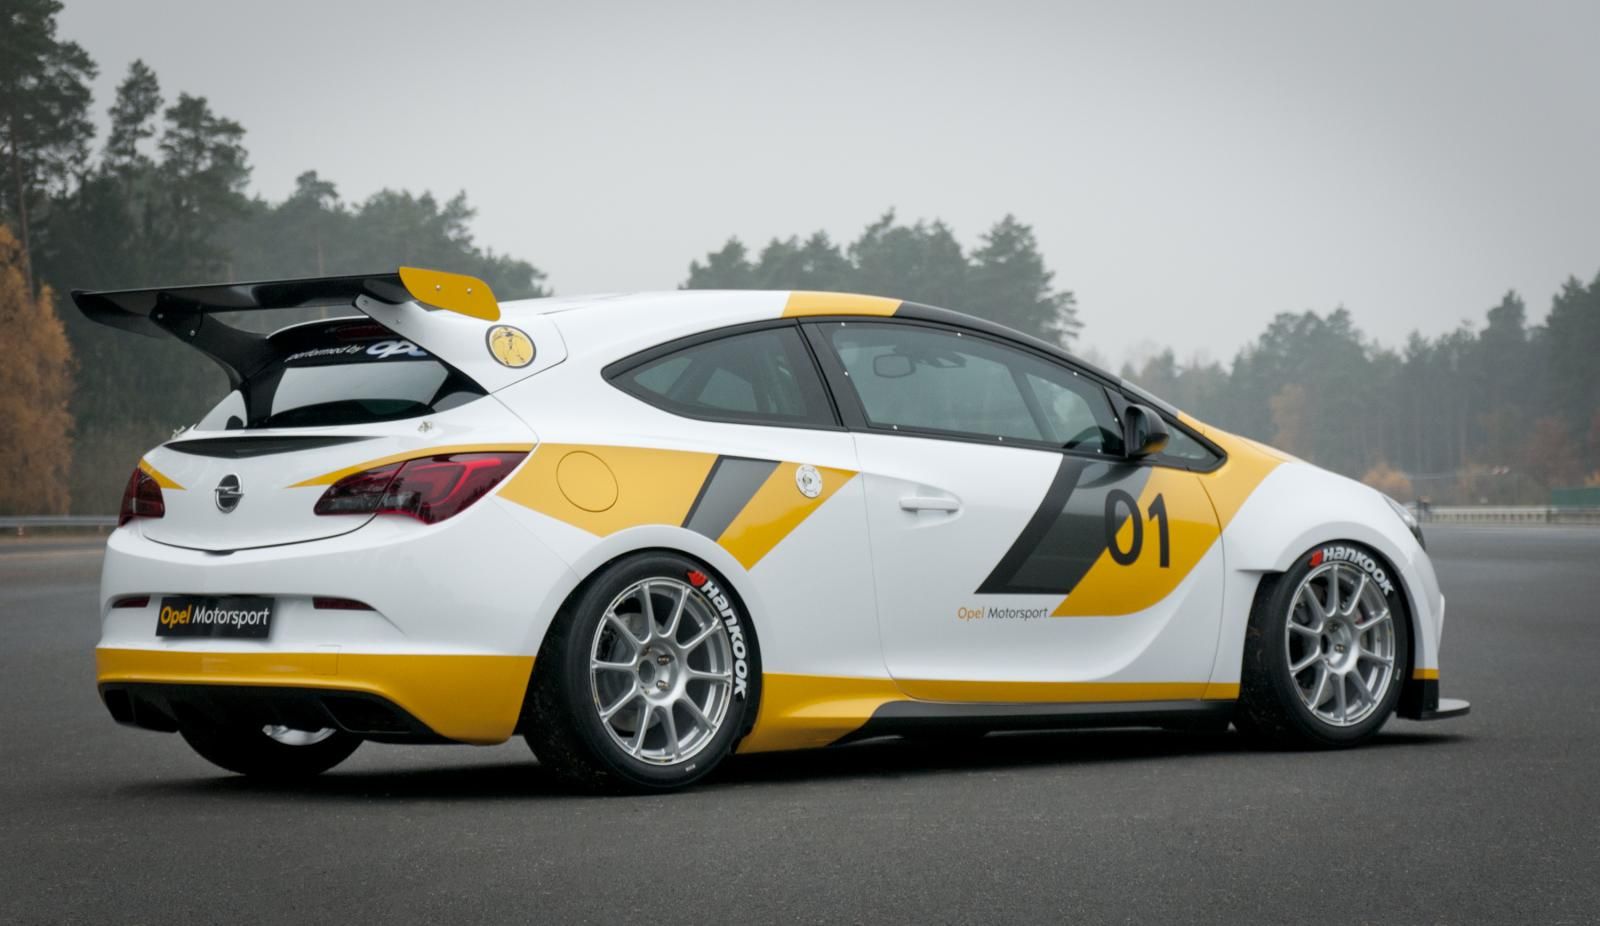 2013 Opel Astra OPC Cup